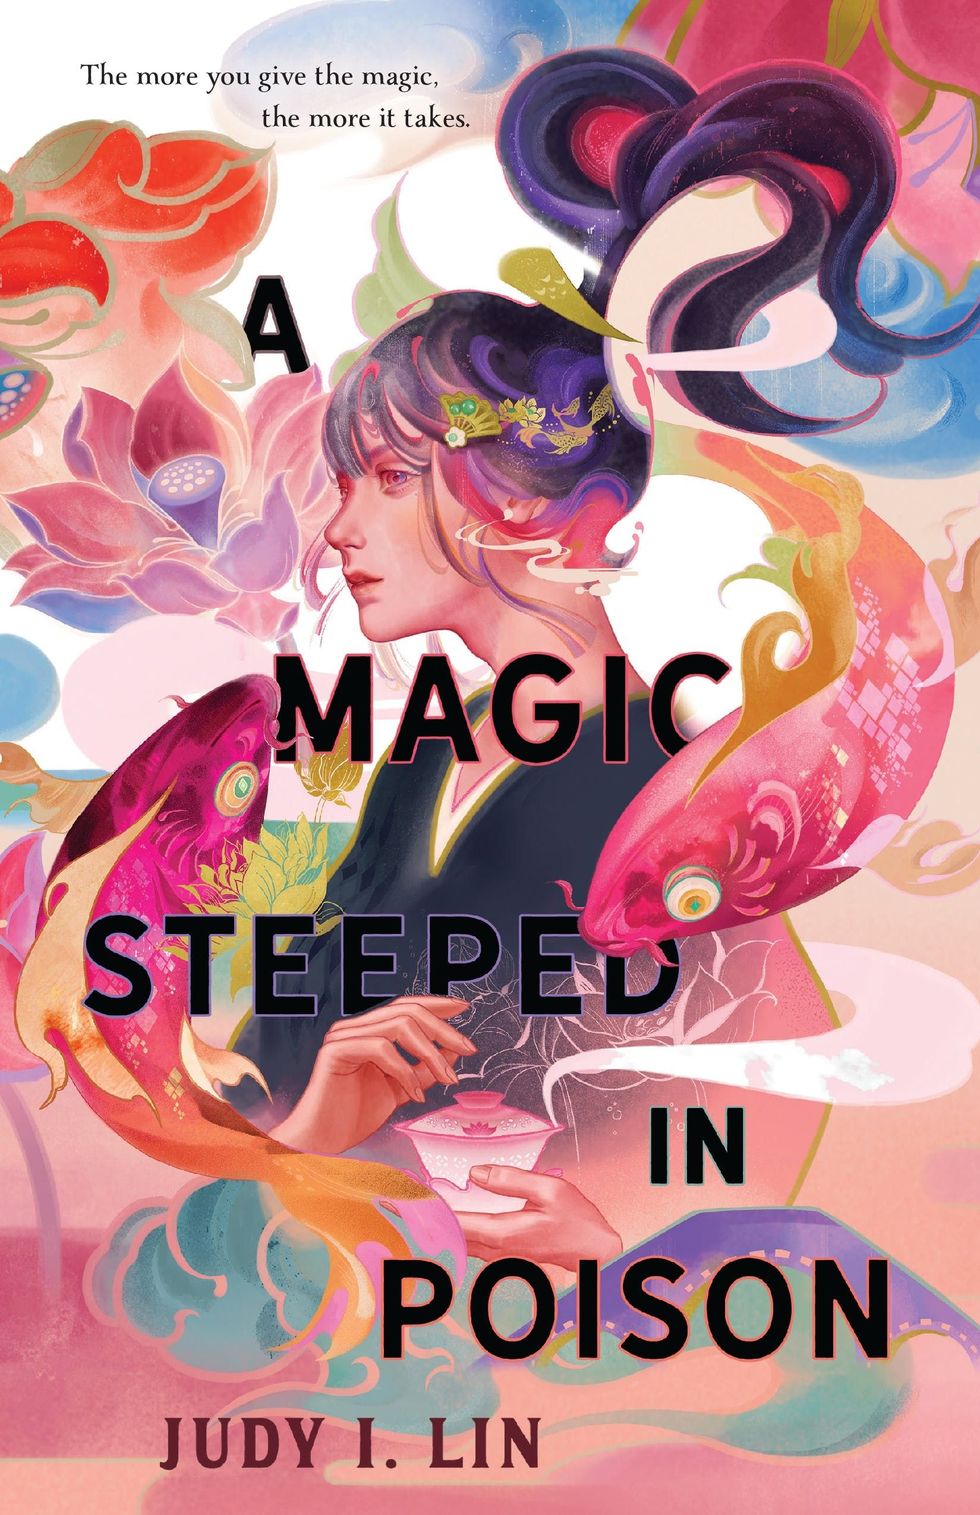 <i>A Magic Steeped in Poison</i> by Judy I. Lin